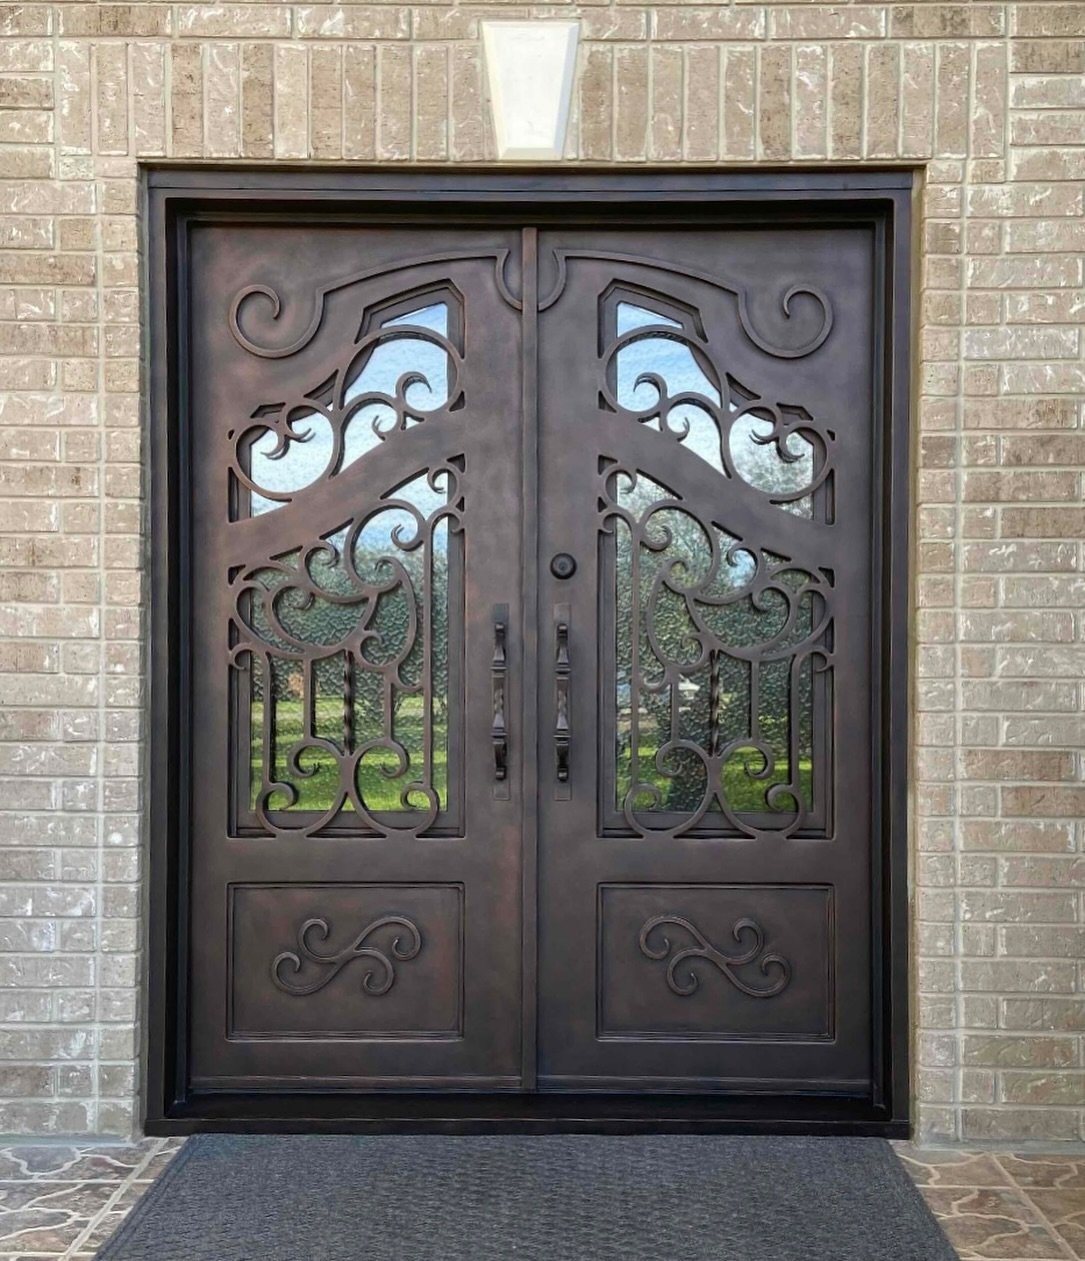 Featuring today&rsquo;s Door Design: 
S A N T A  L A U R A ✨⚜️
.
.
.
#SanMarcosIrondoors #irondoors #irondoor #modernirondoors #exteriordoors #interiordoors #steeldoor #tuesdaymotivation #tuesday #tuesdayvibes #metalworks #homeinspo #irondoors #moder